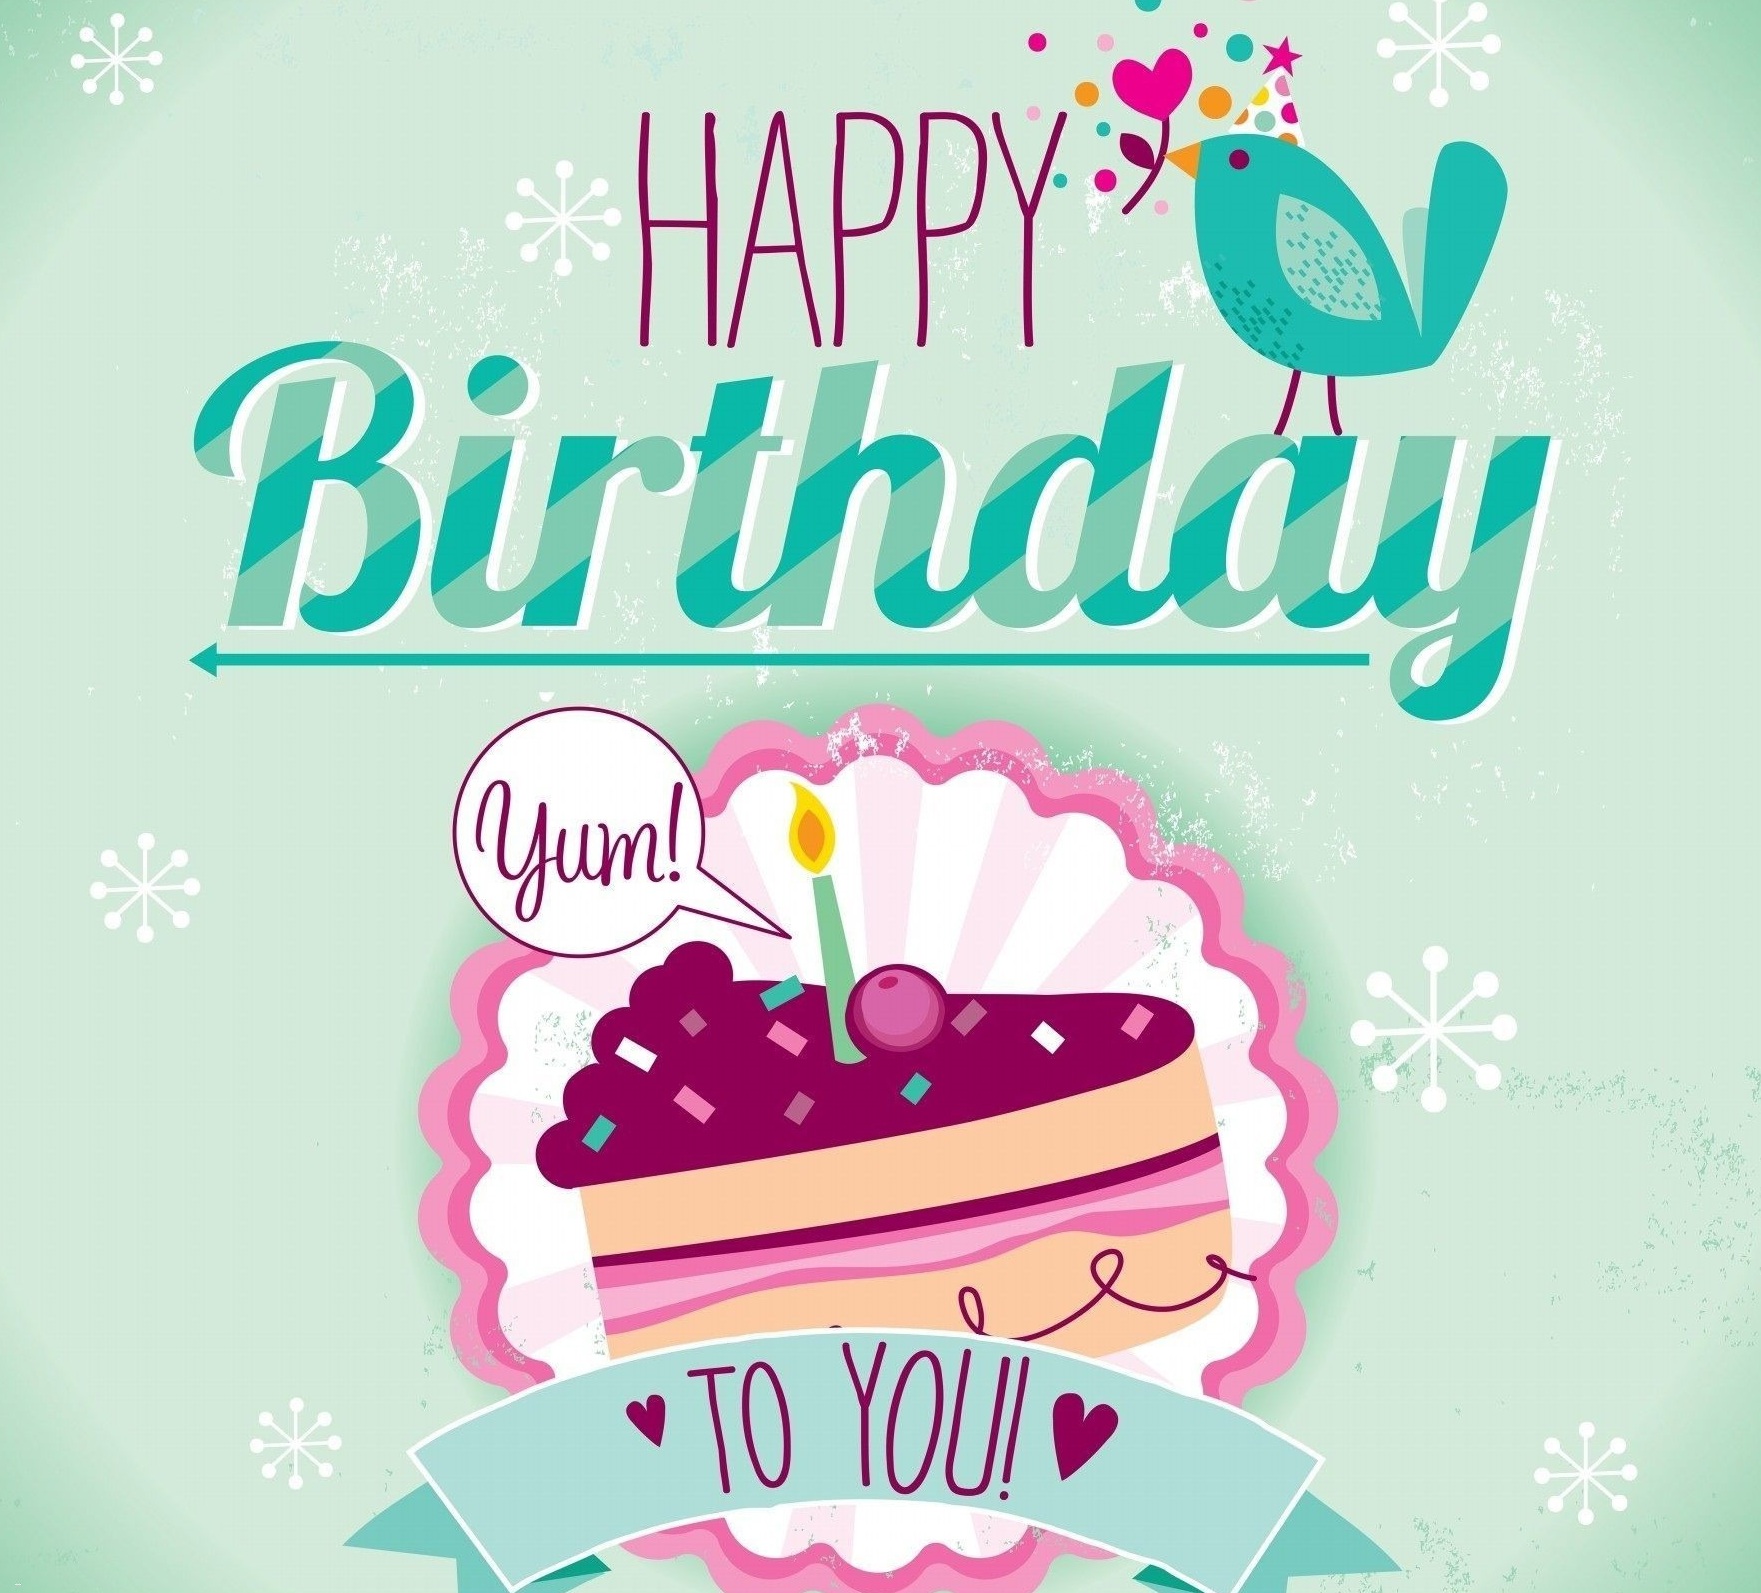 Birthday Wishes Greeting Cards and sayings